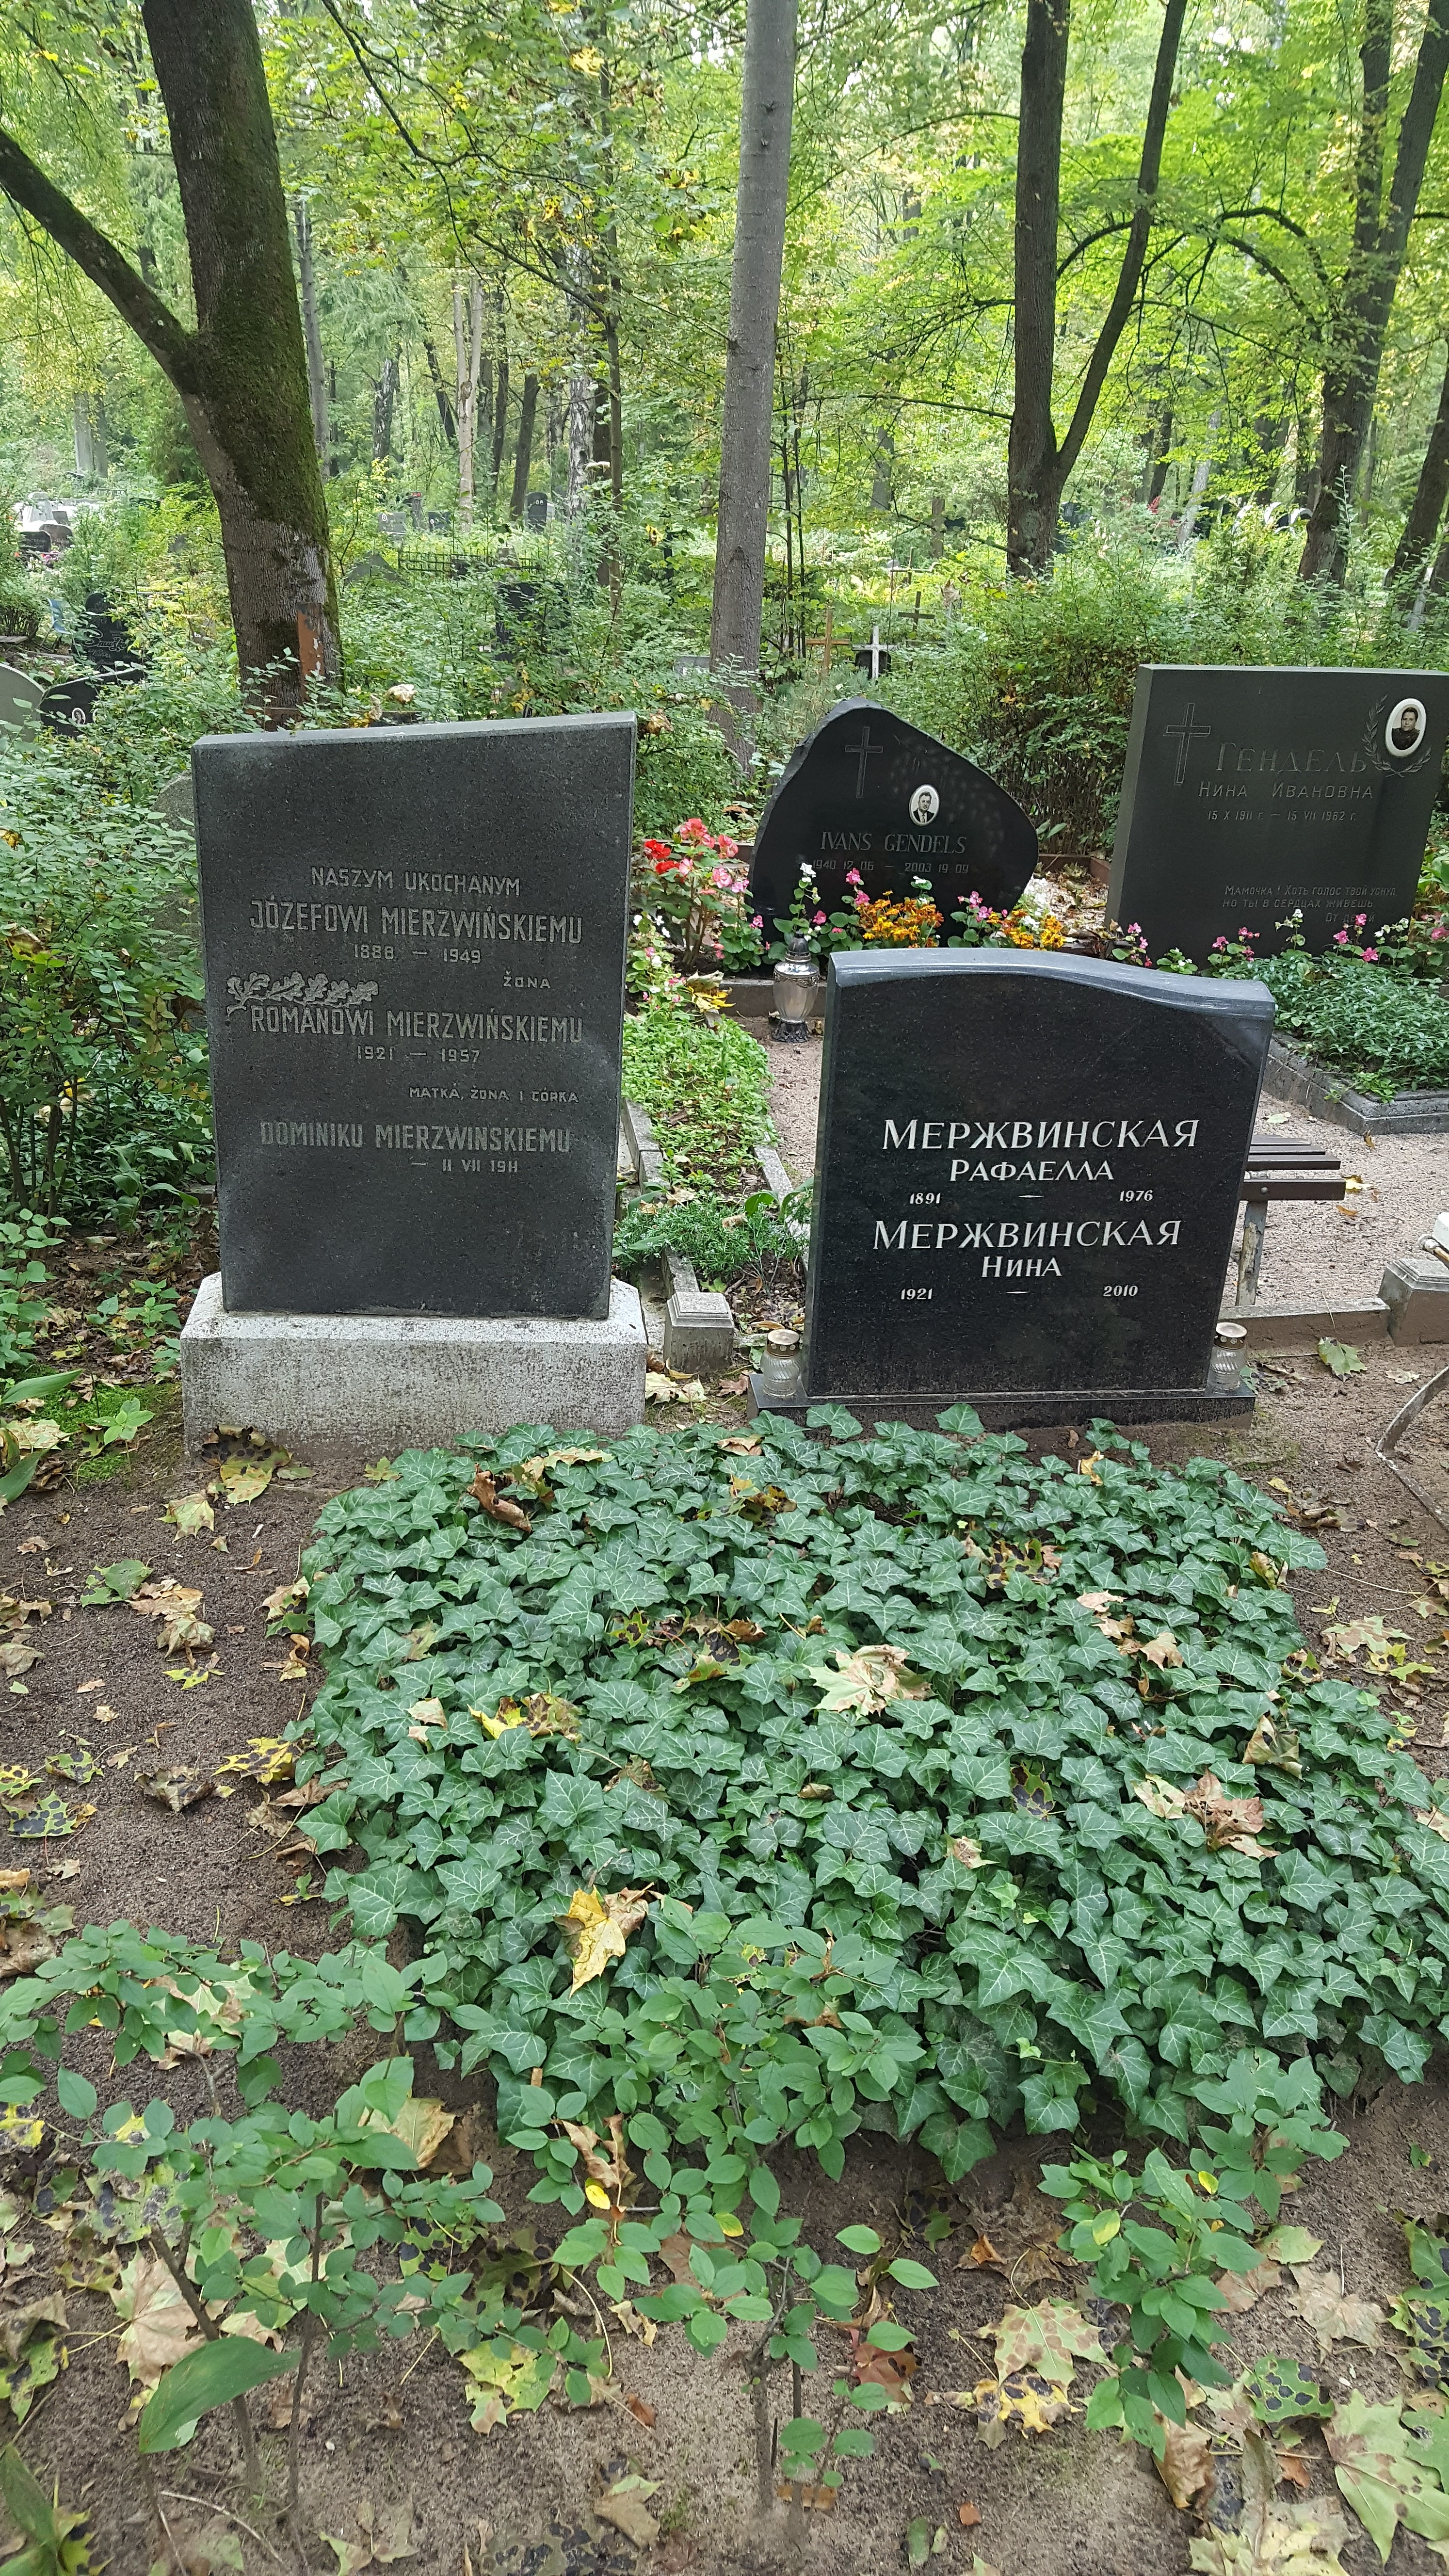 Tombstone of the Mierzwinski family, St. Michael's cemetery in Riga, as of 2021